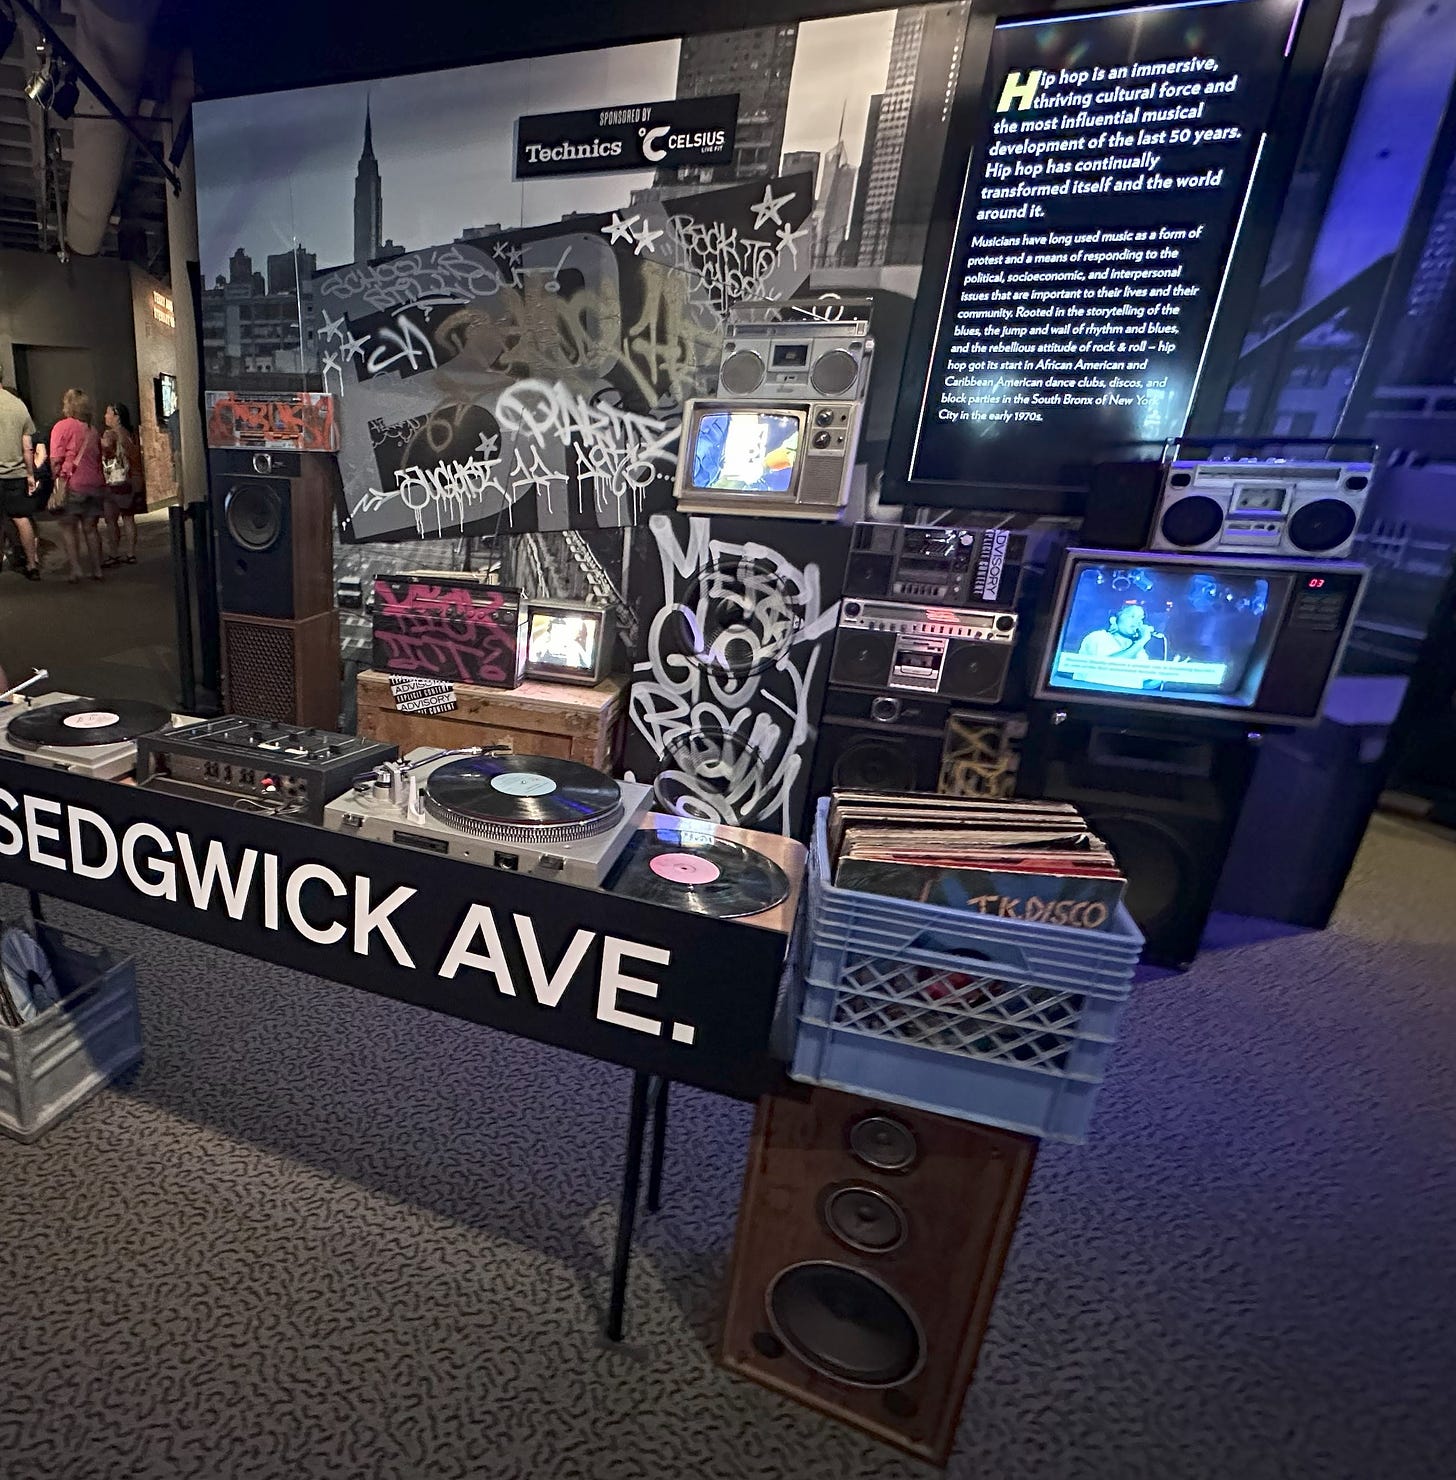 Rock & Roll Hall of Fame - Hip Hop at 50 exhibit